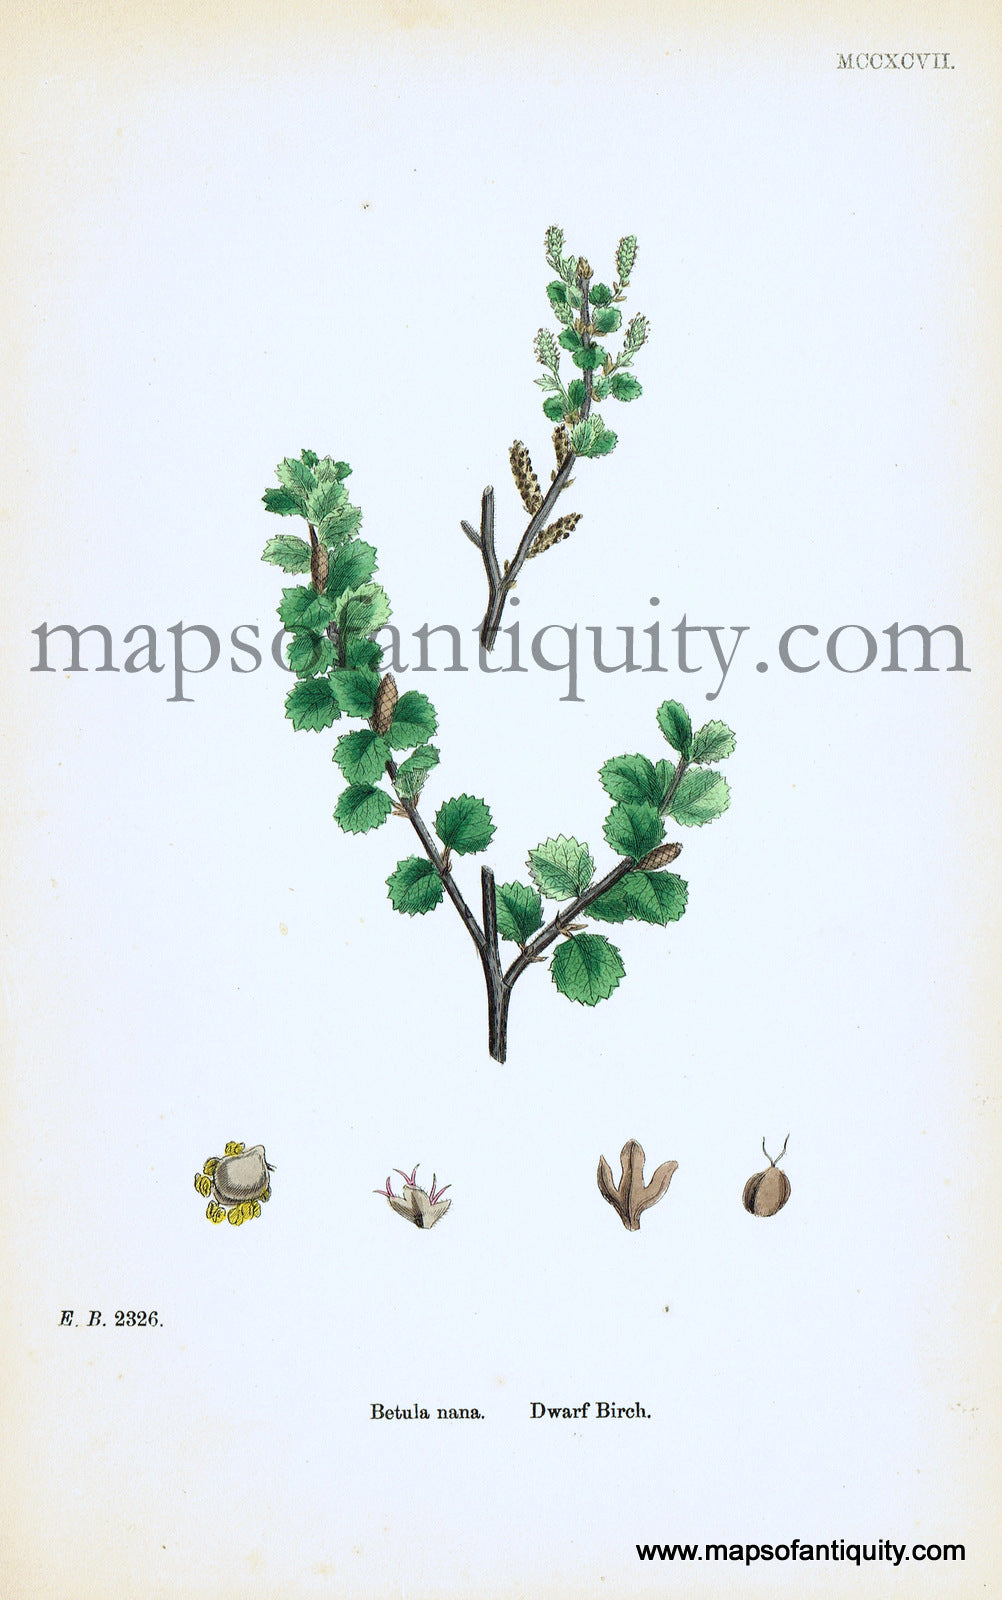 Antique-Hand-Colored-Print-Betula-nana-Antique-Prints-Natural-History-Botanical-c.-1860-Sowerby-Maps-Of-Antiquity